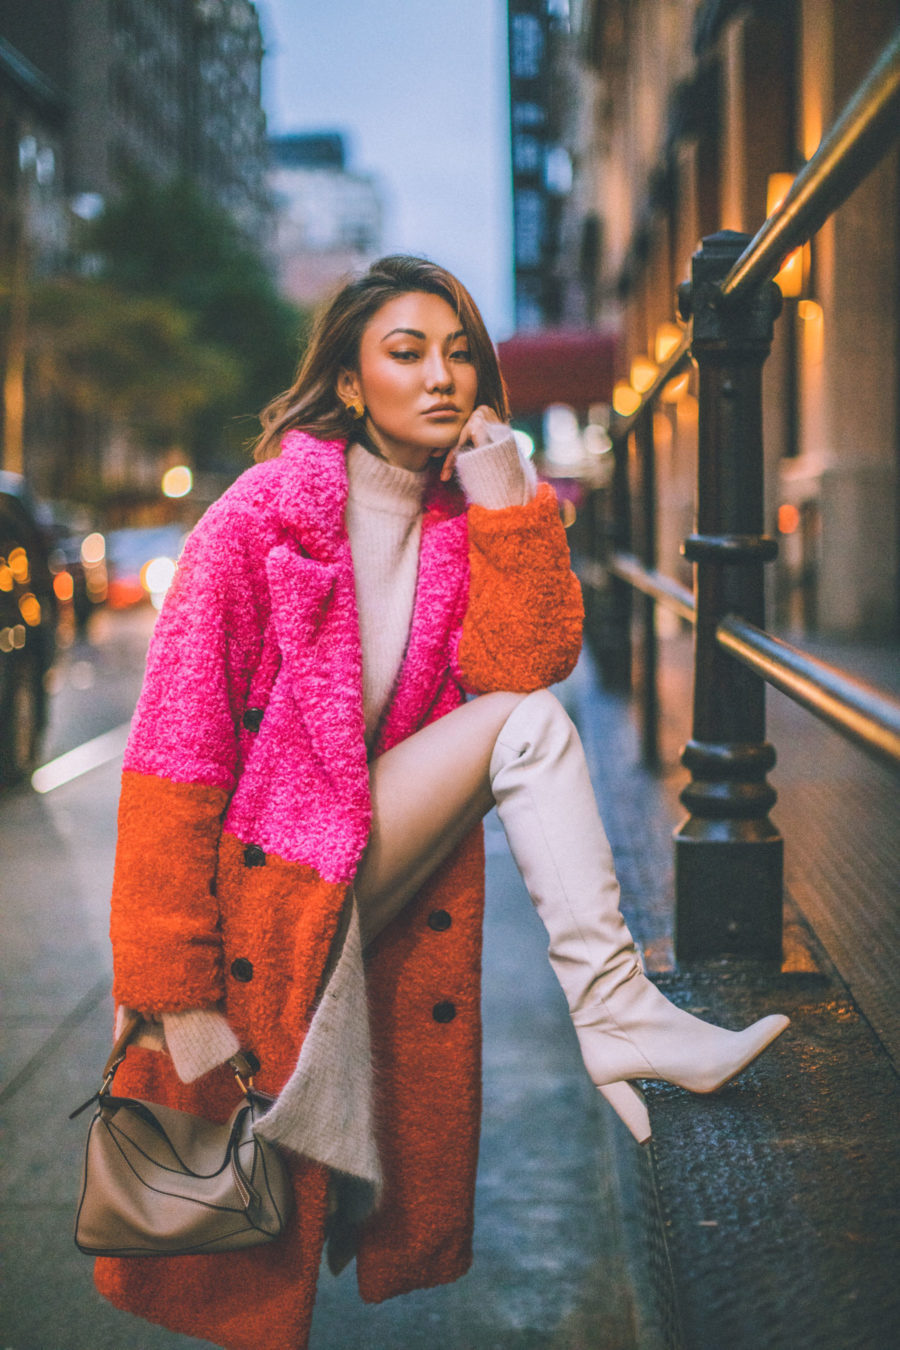 fashion blogger jessica wang shares chic christmas outfits for every day of the week in a matching white knit set and colorblock coat// Notjessfashion.com